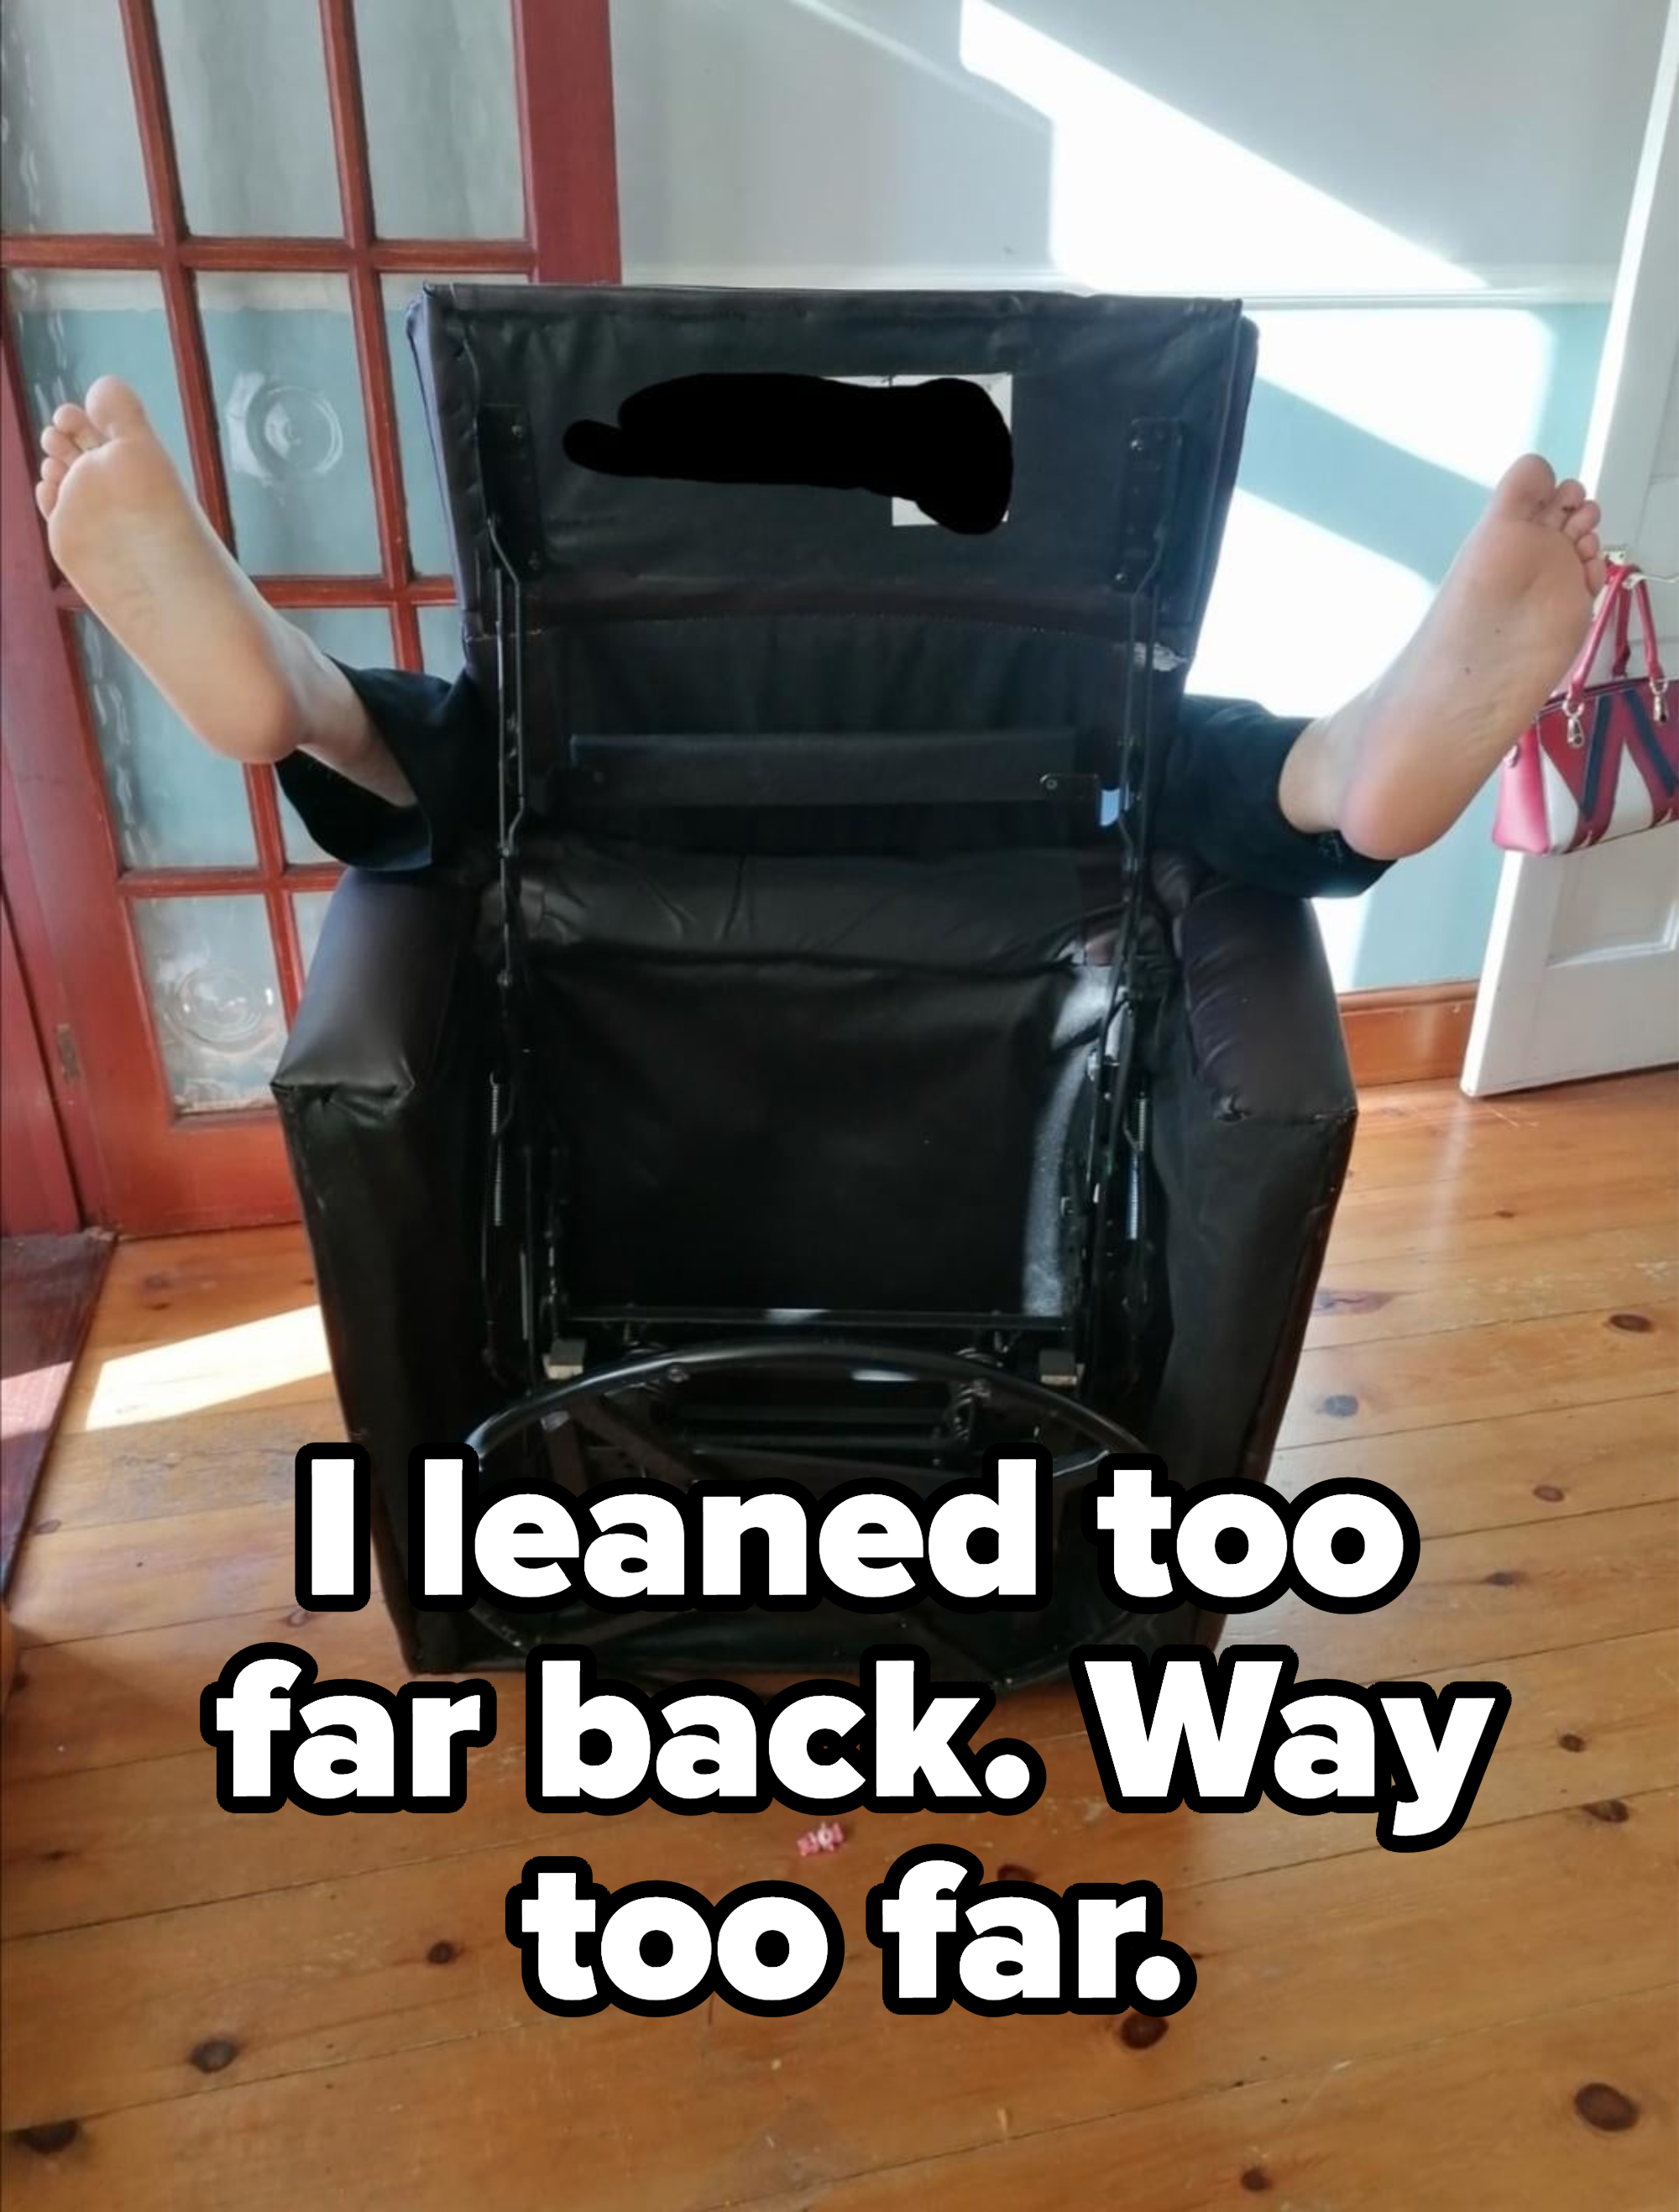 View of a reclining chair with the seat upended, with two legs emerging from the sides, with caption &quot;I leaned too far back, way too far&quot;